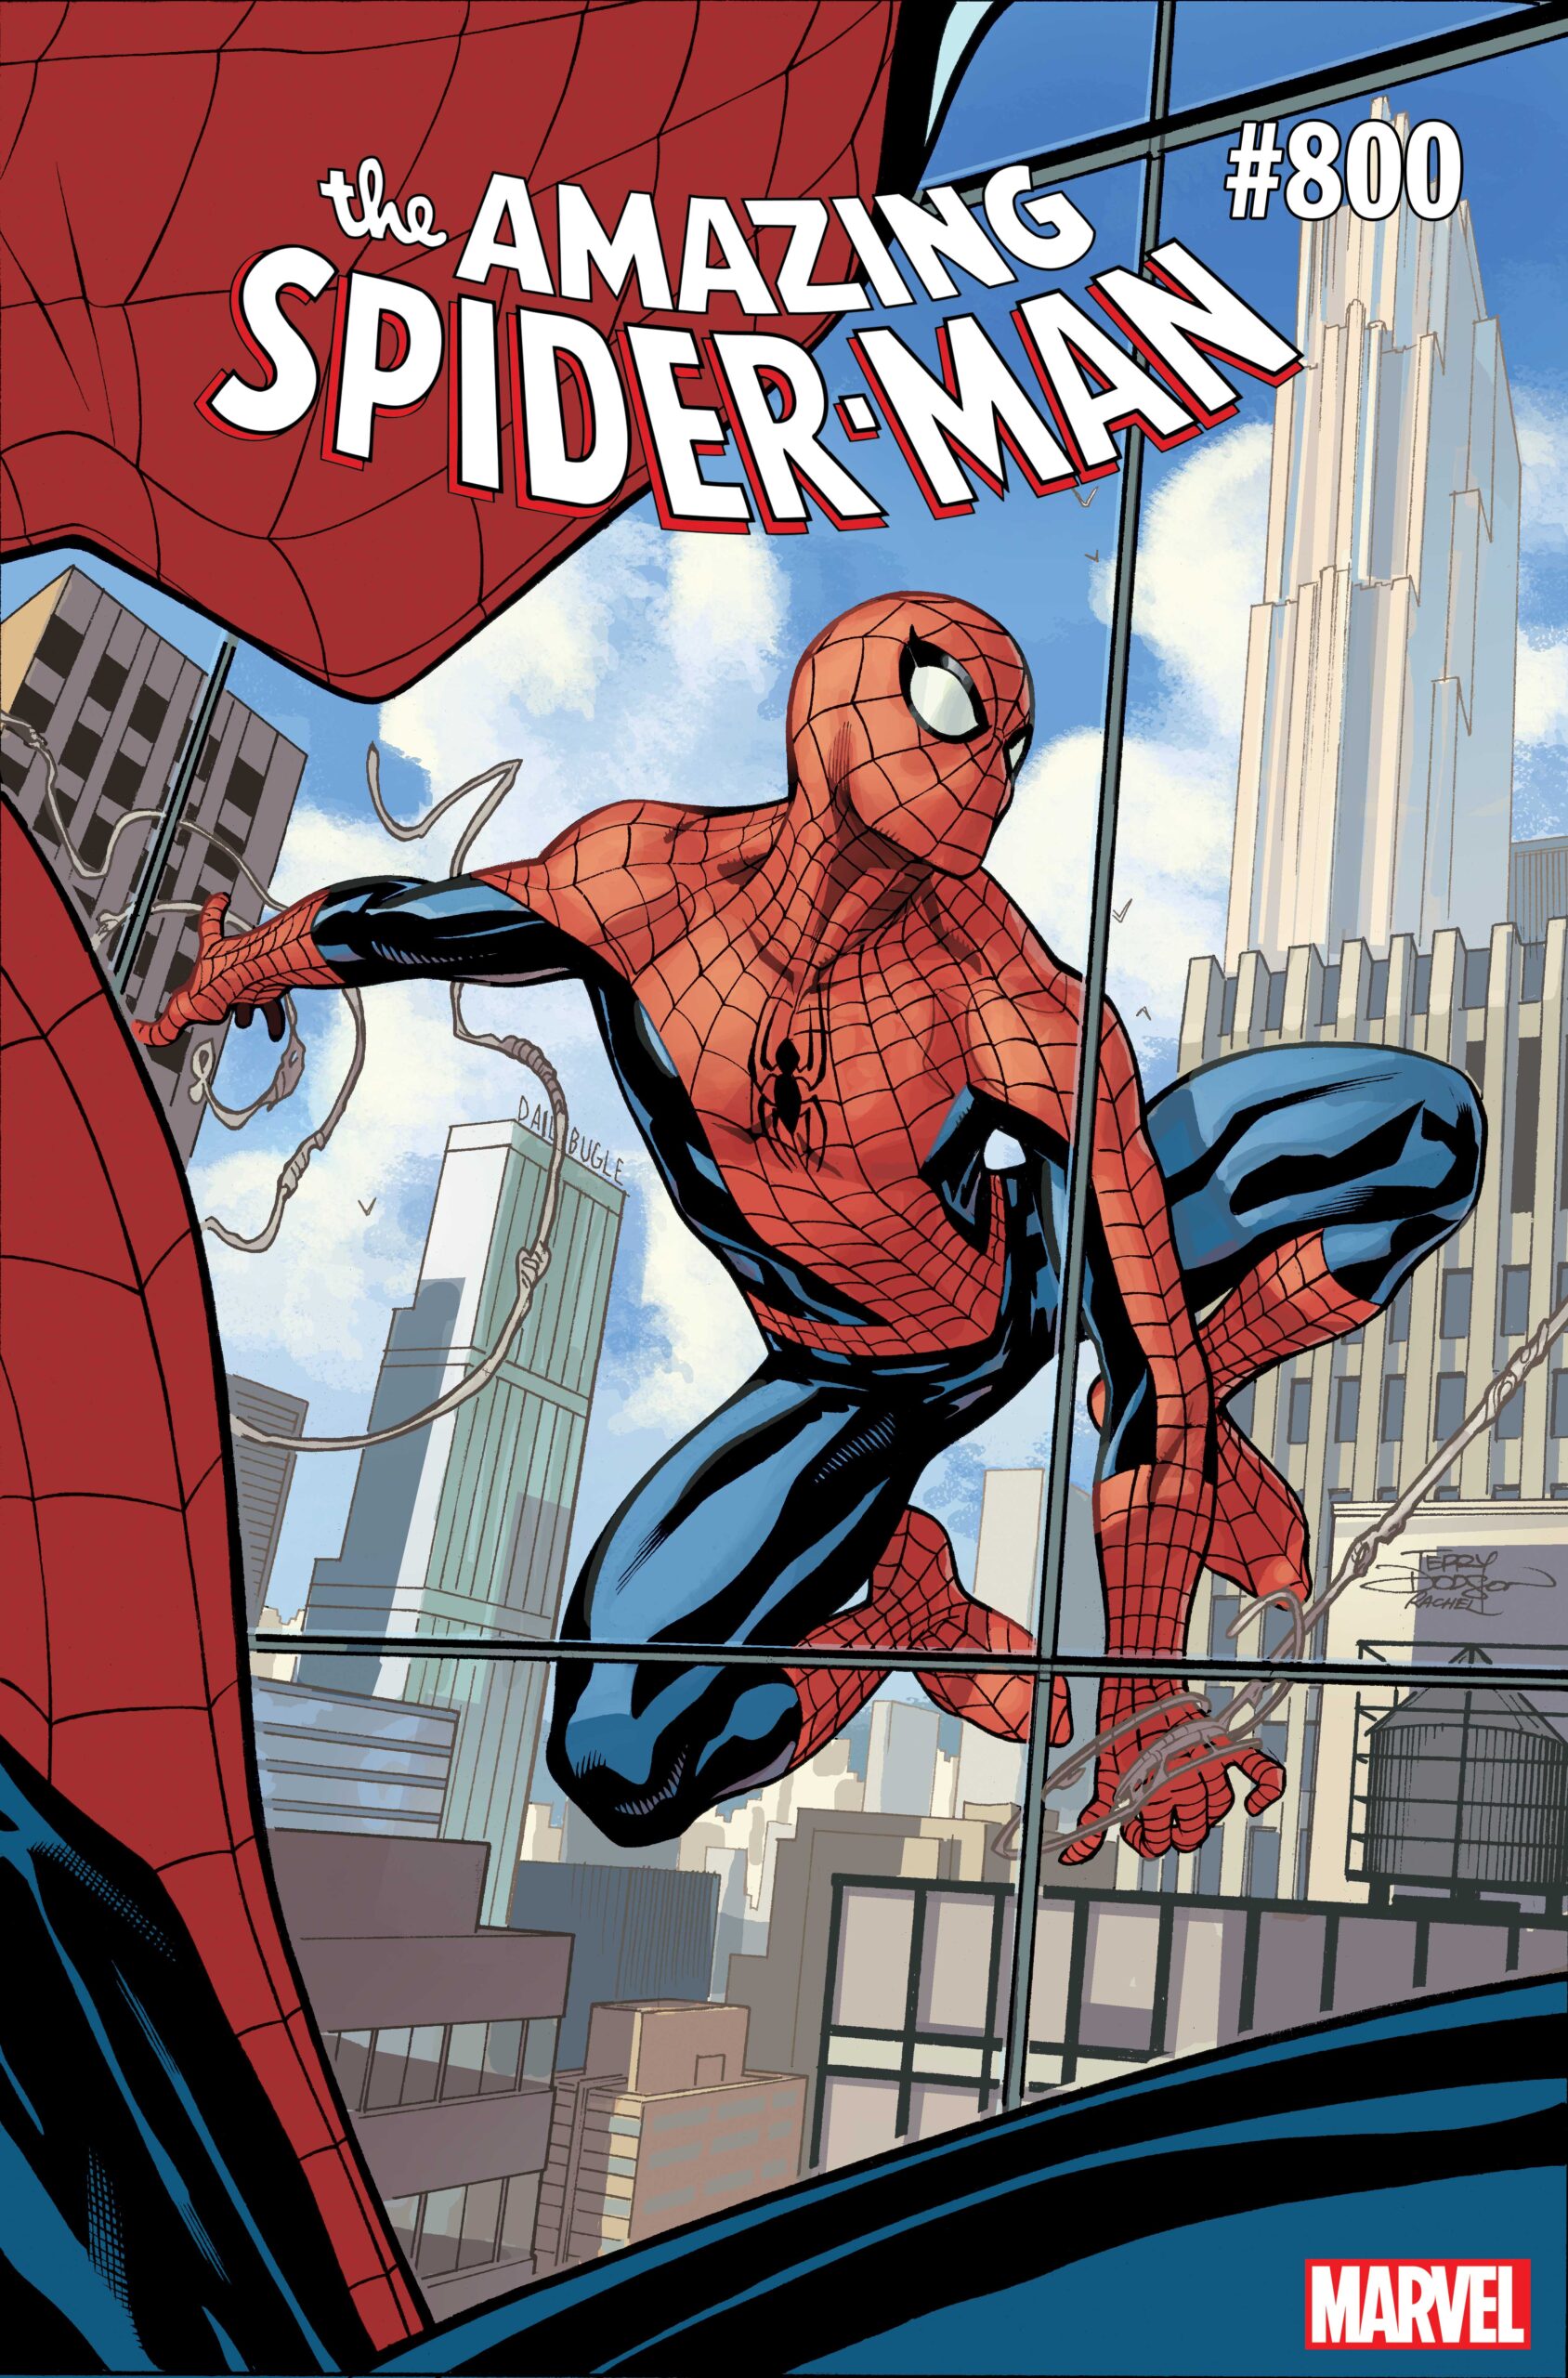 Celebrate AMAZING SPIDER-MAN’s Landmark 800th Issue with a Variant